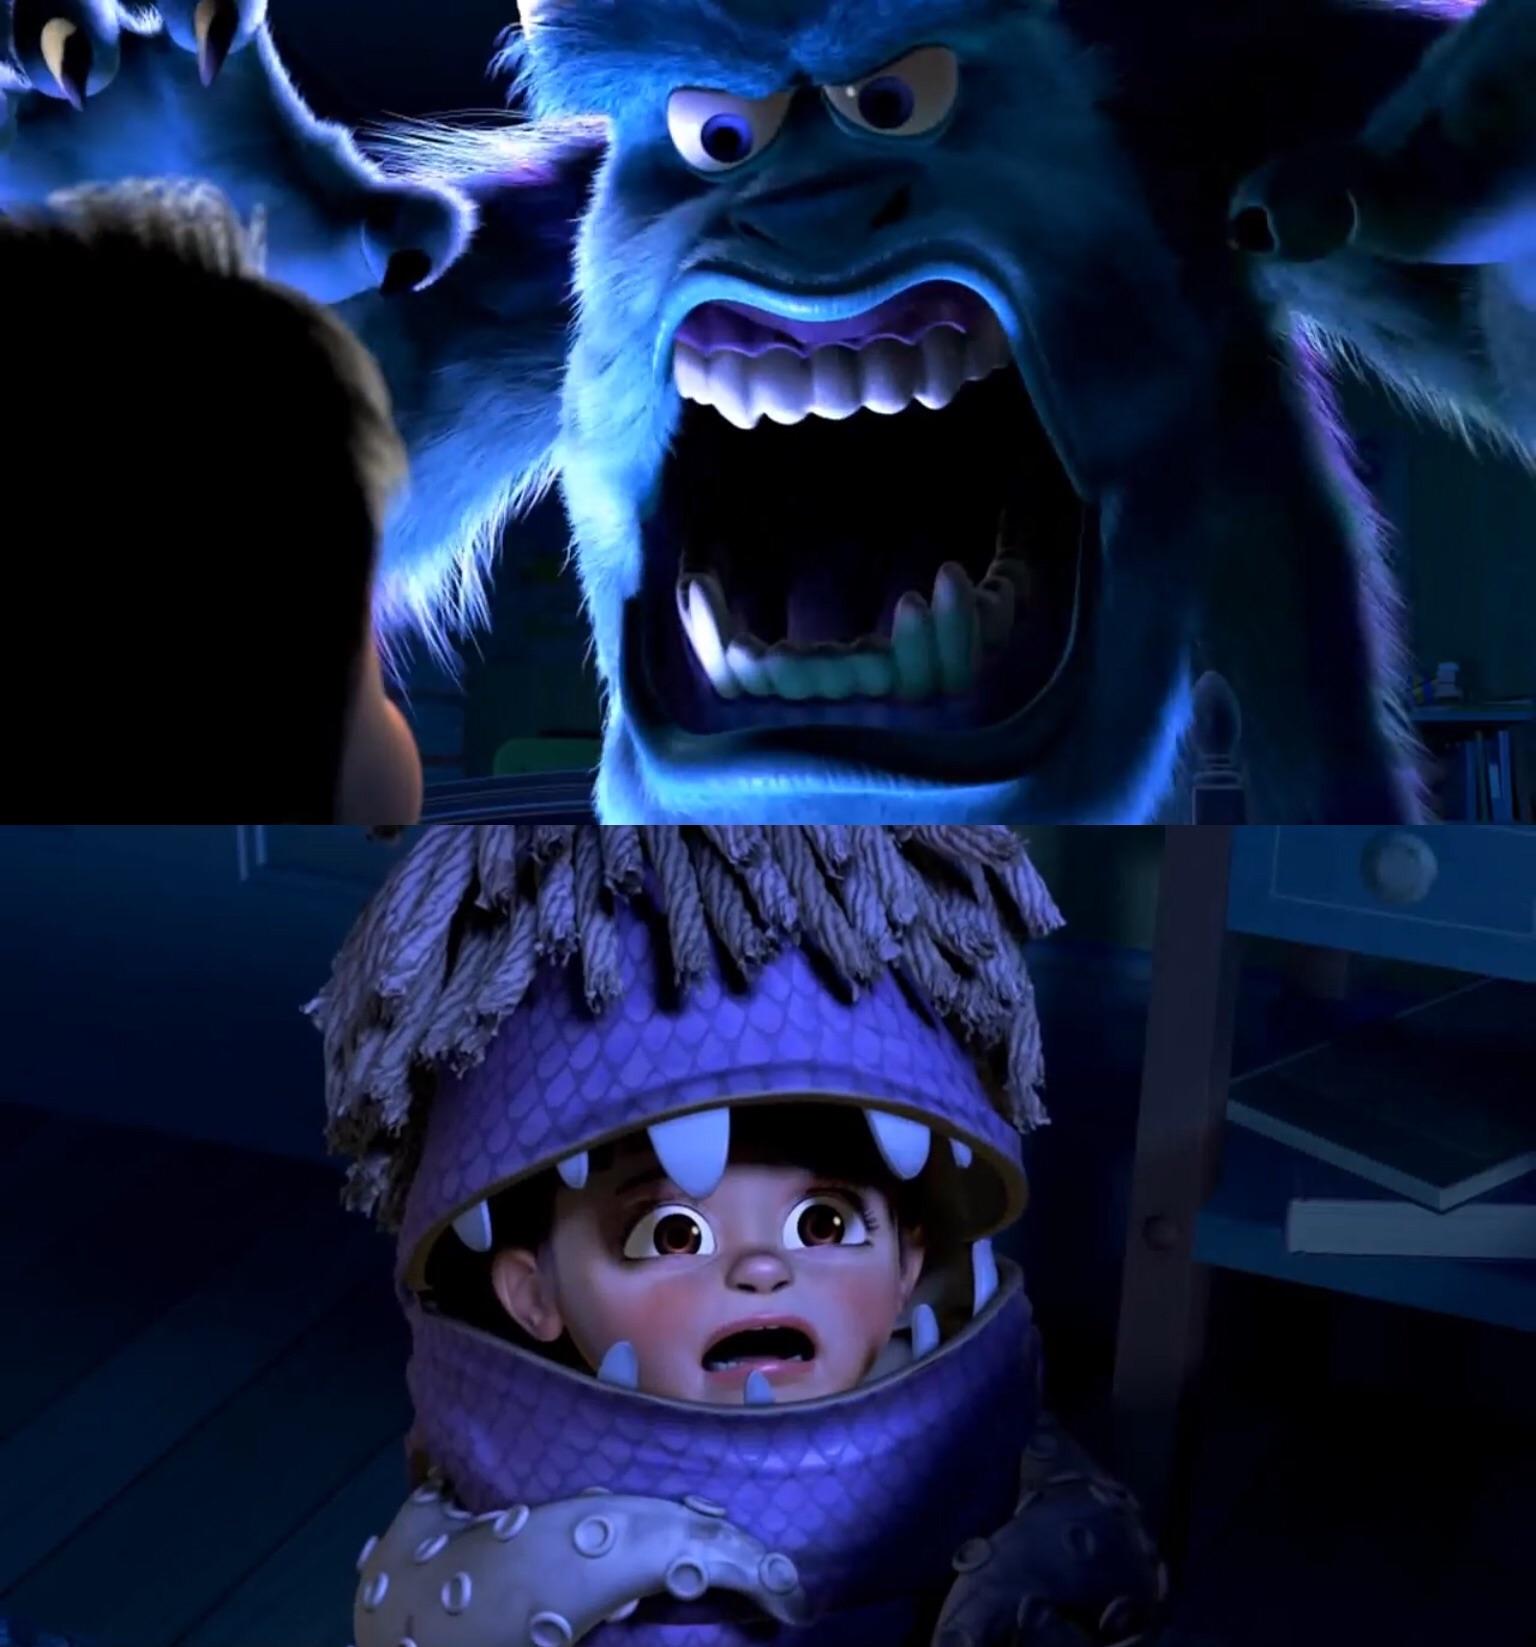 No "Sully scaring Boo" memes have been featured yet. 